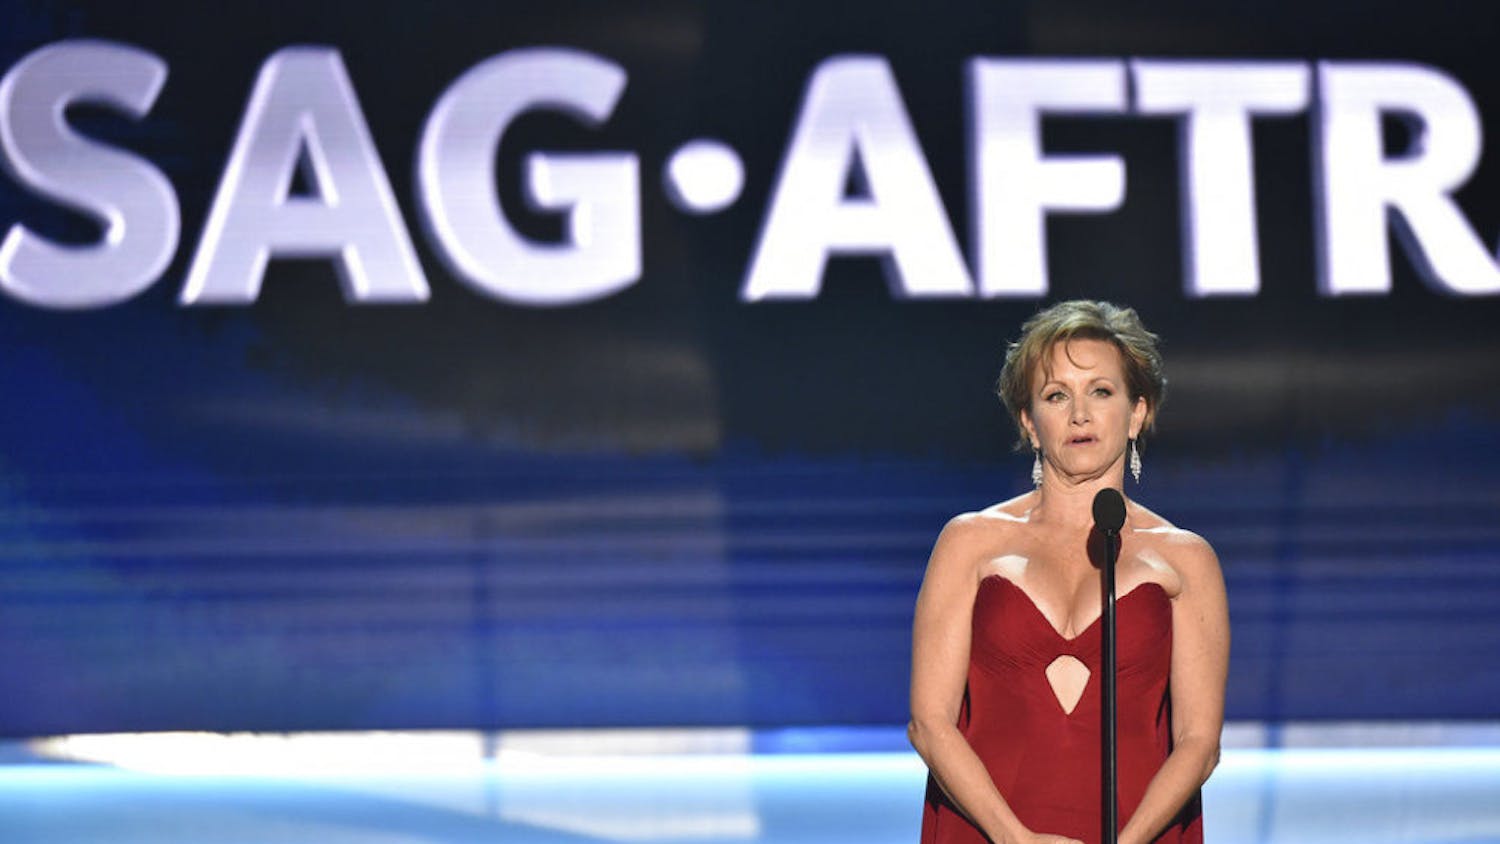 SAG-AFTRA President Gabrielle Carteris speaks at the 24th annual Screen Actors Guild Awards at the Shrine Auditorium &amp; Expo Hall on Sunday, Jan. 21, 2018, in Los Angeles. (Photo by Vince Bucci/Invision/AP)